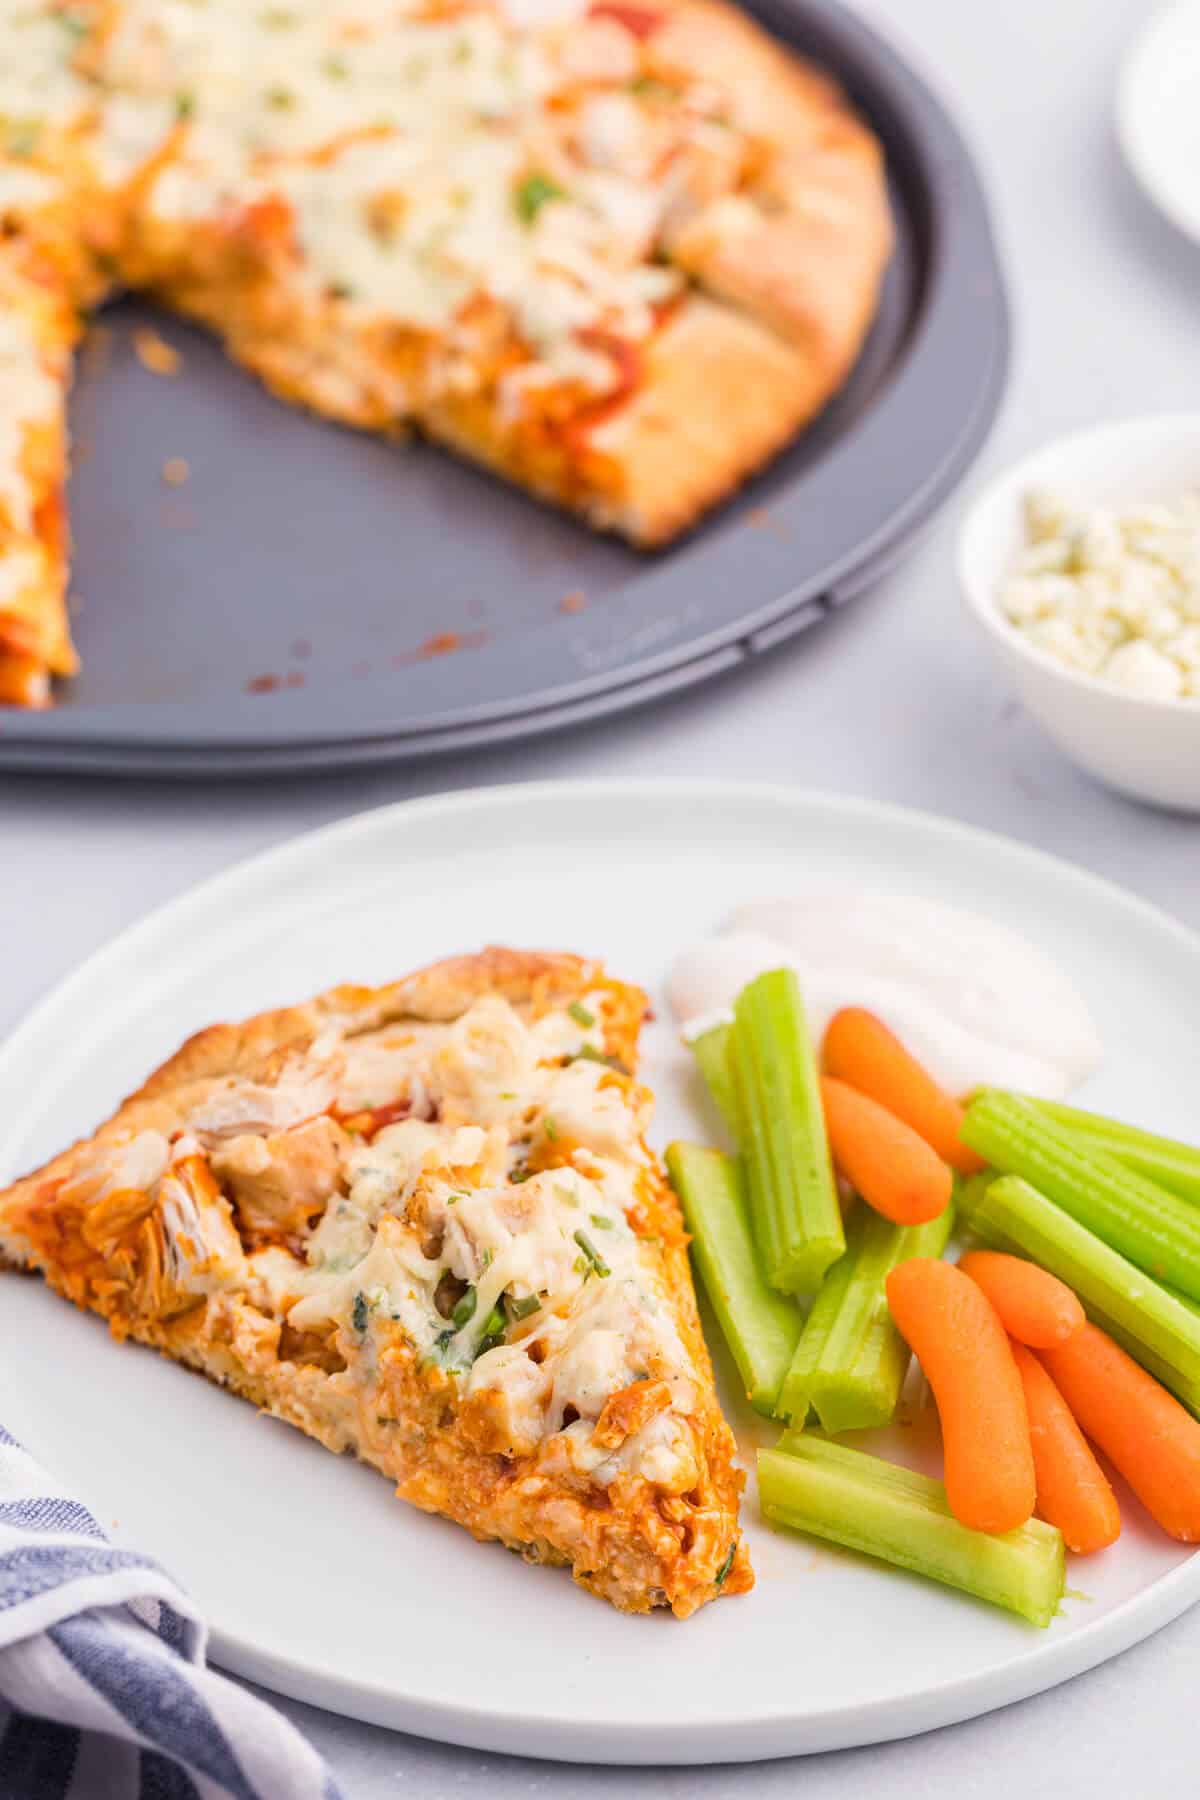 A slice of buffalo chicken pizza on a plate with carrots and celery sticks.